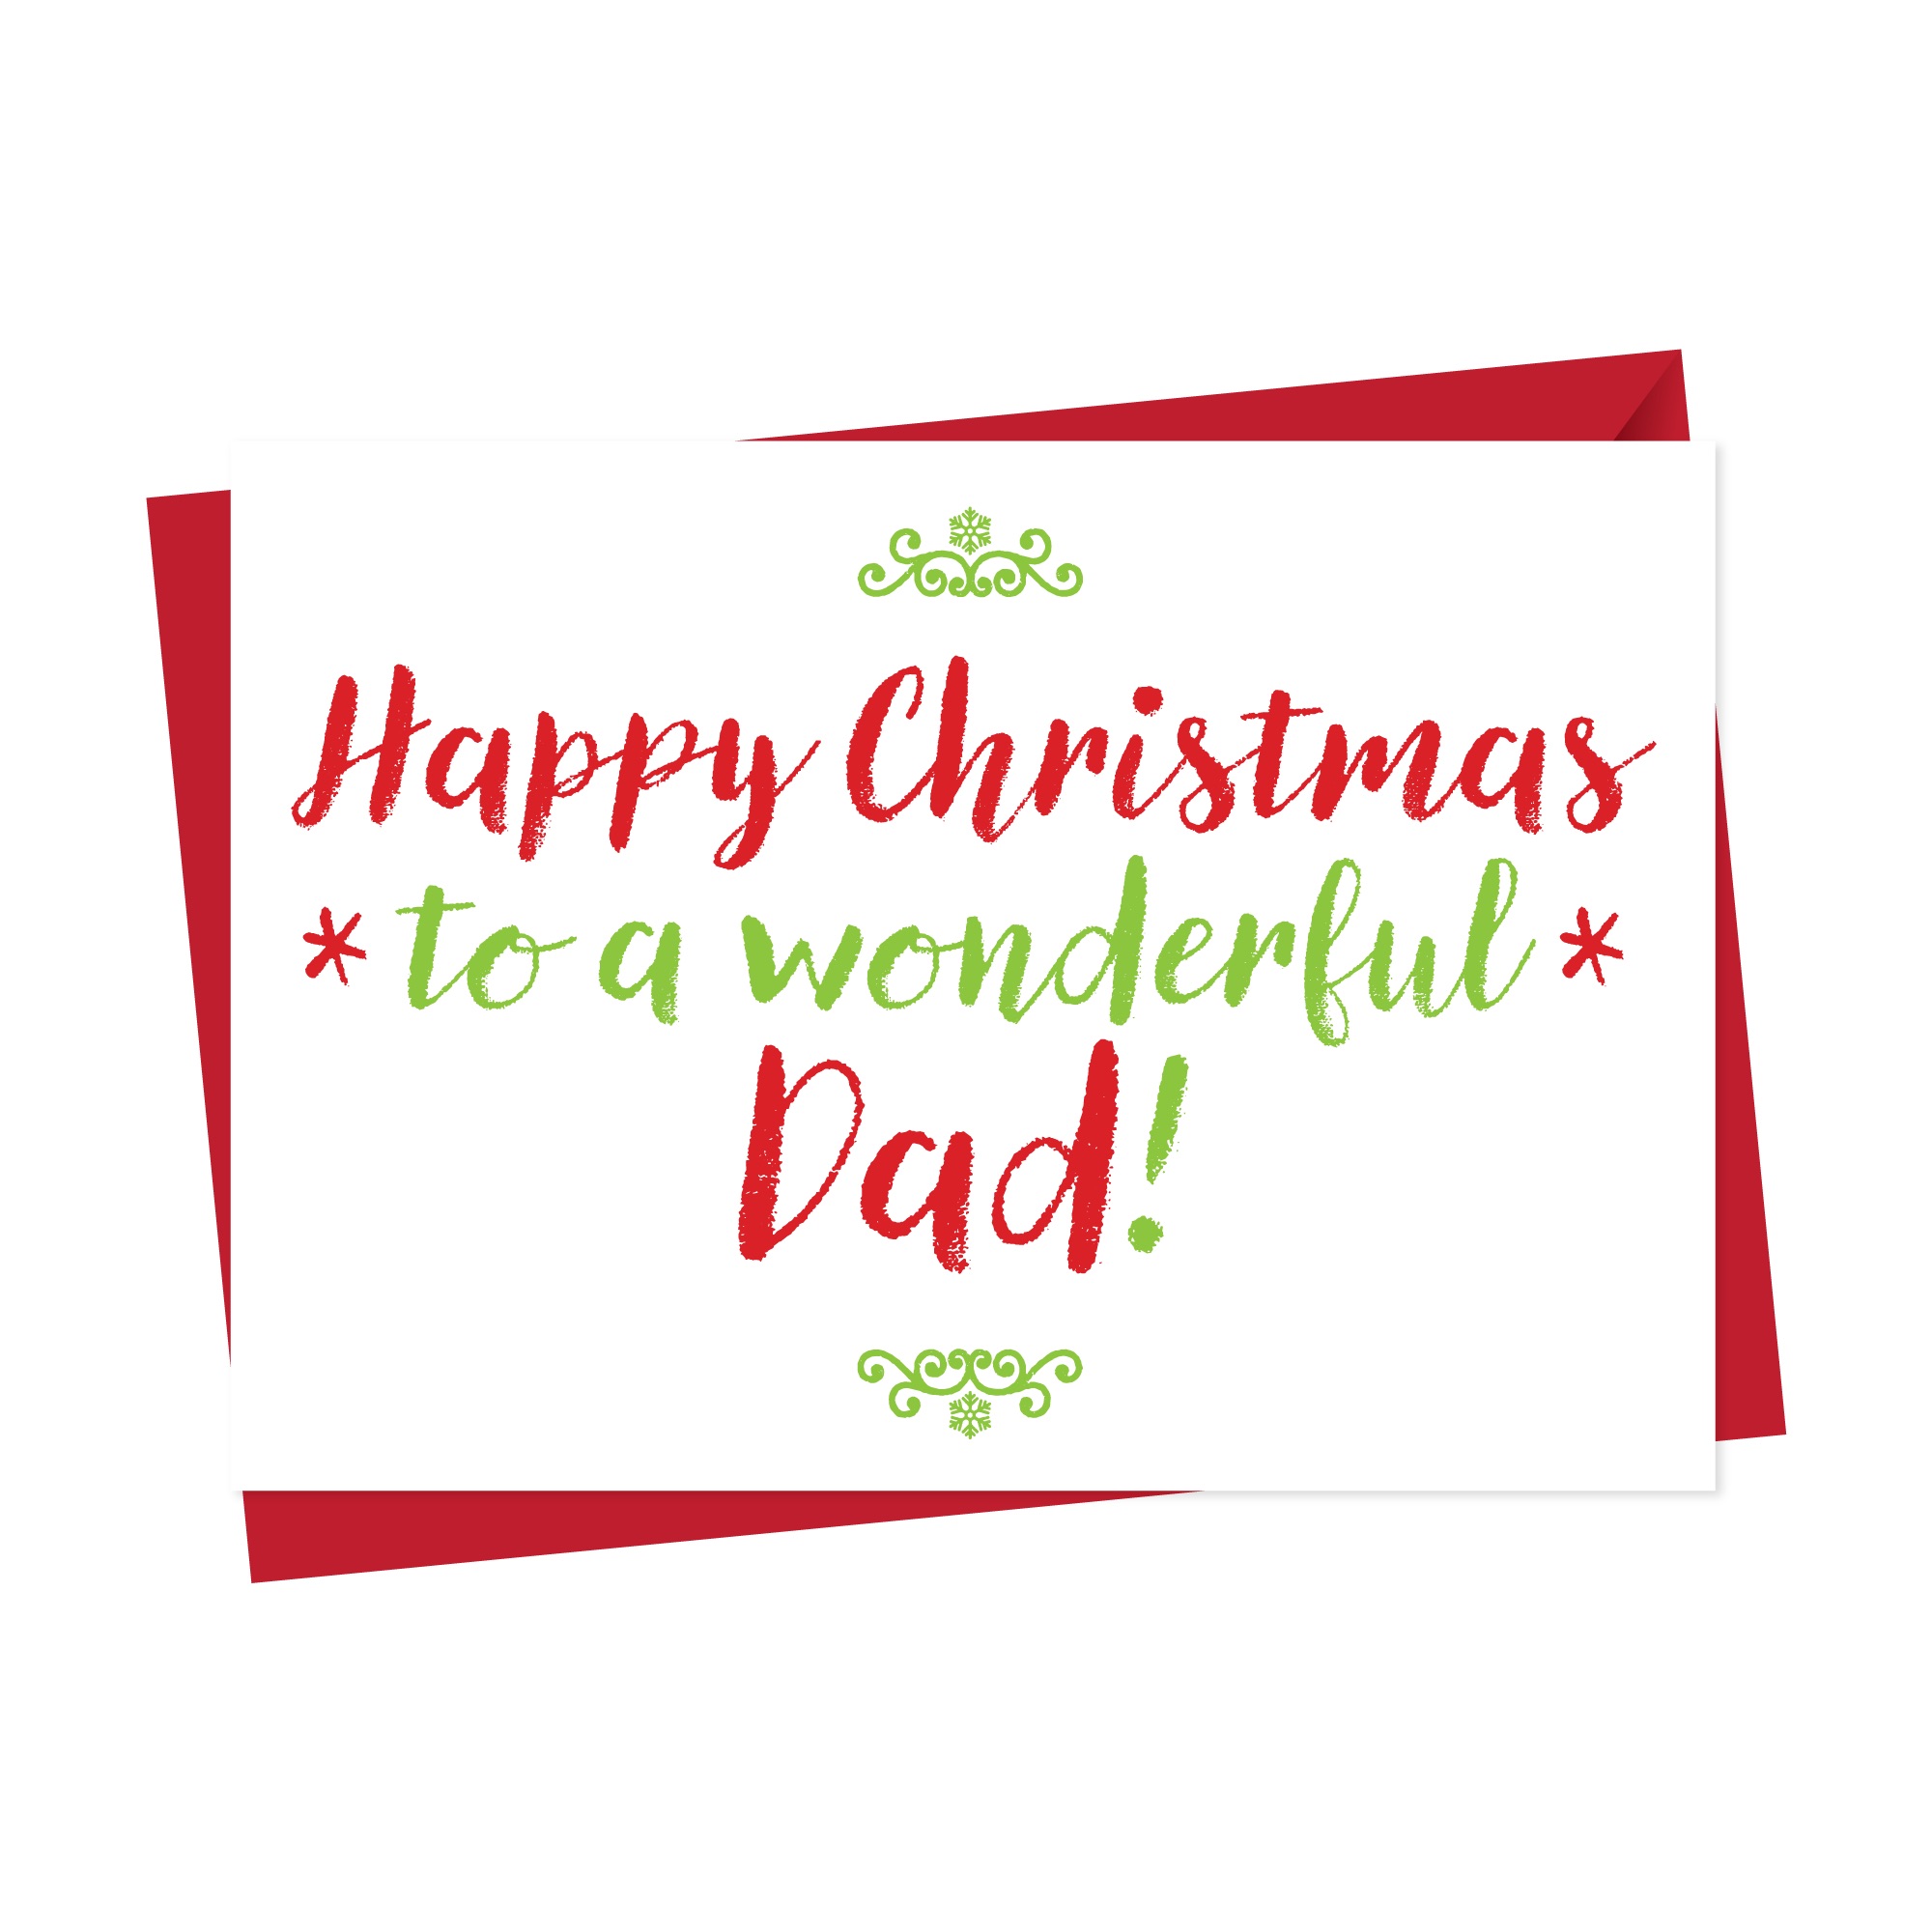 Christmas Card For Wonderful Daddy, Dad or Father